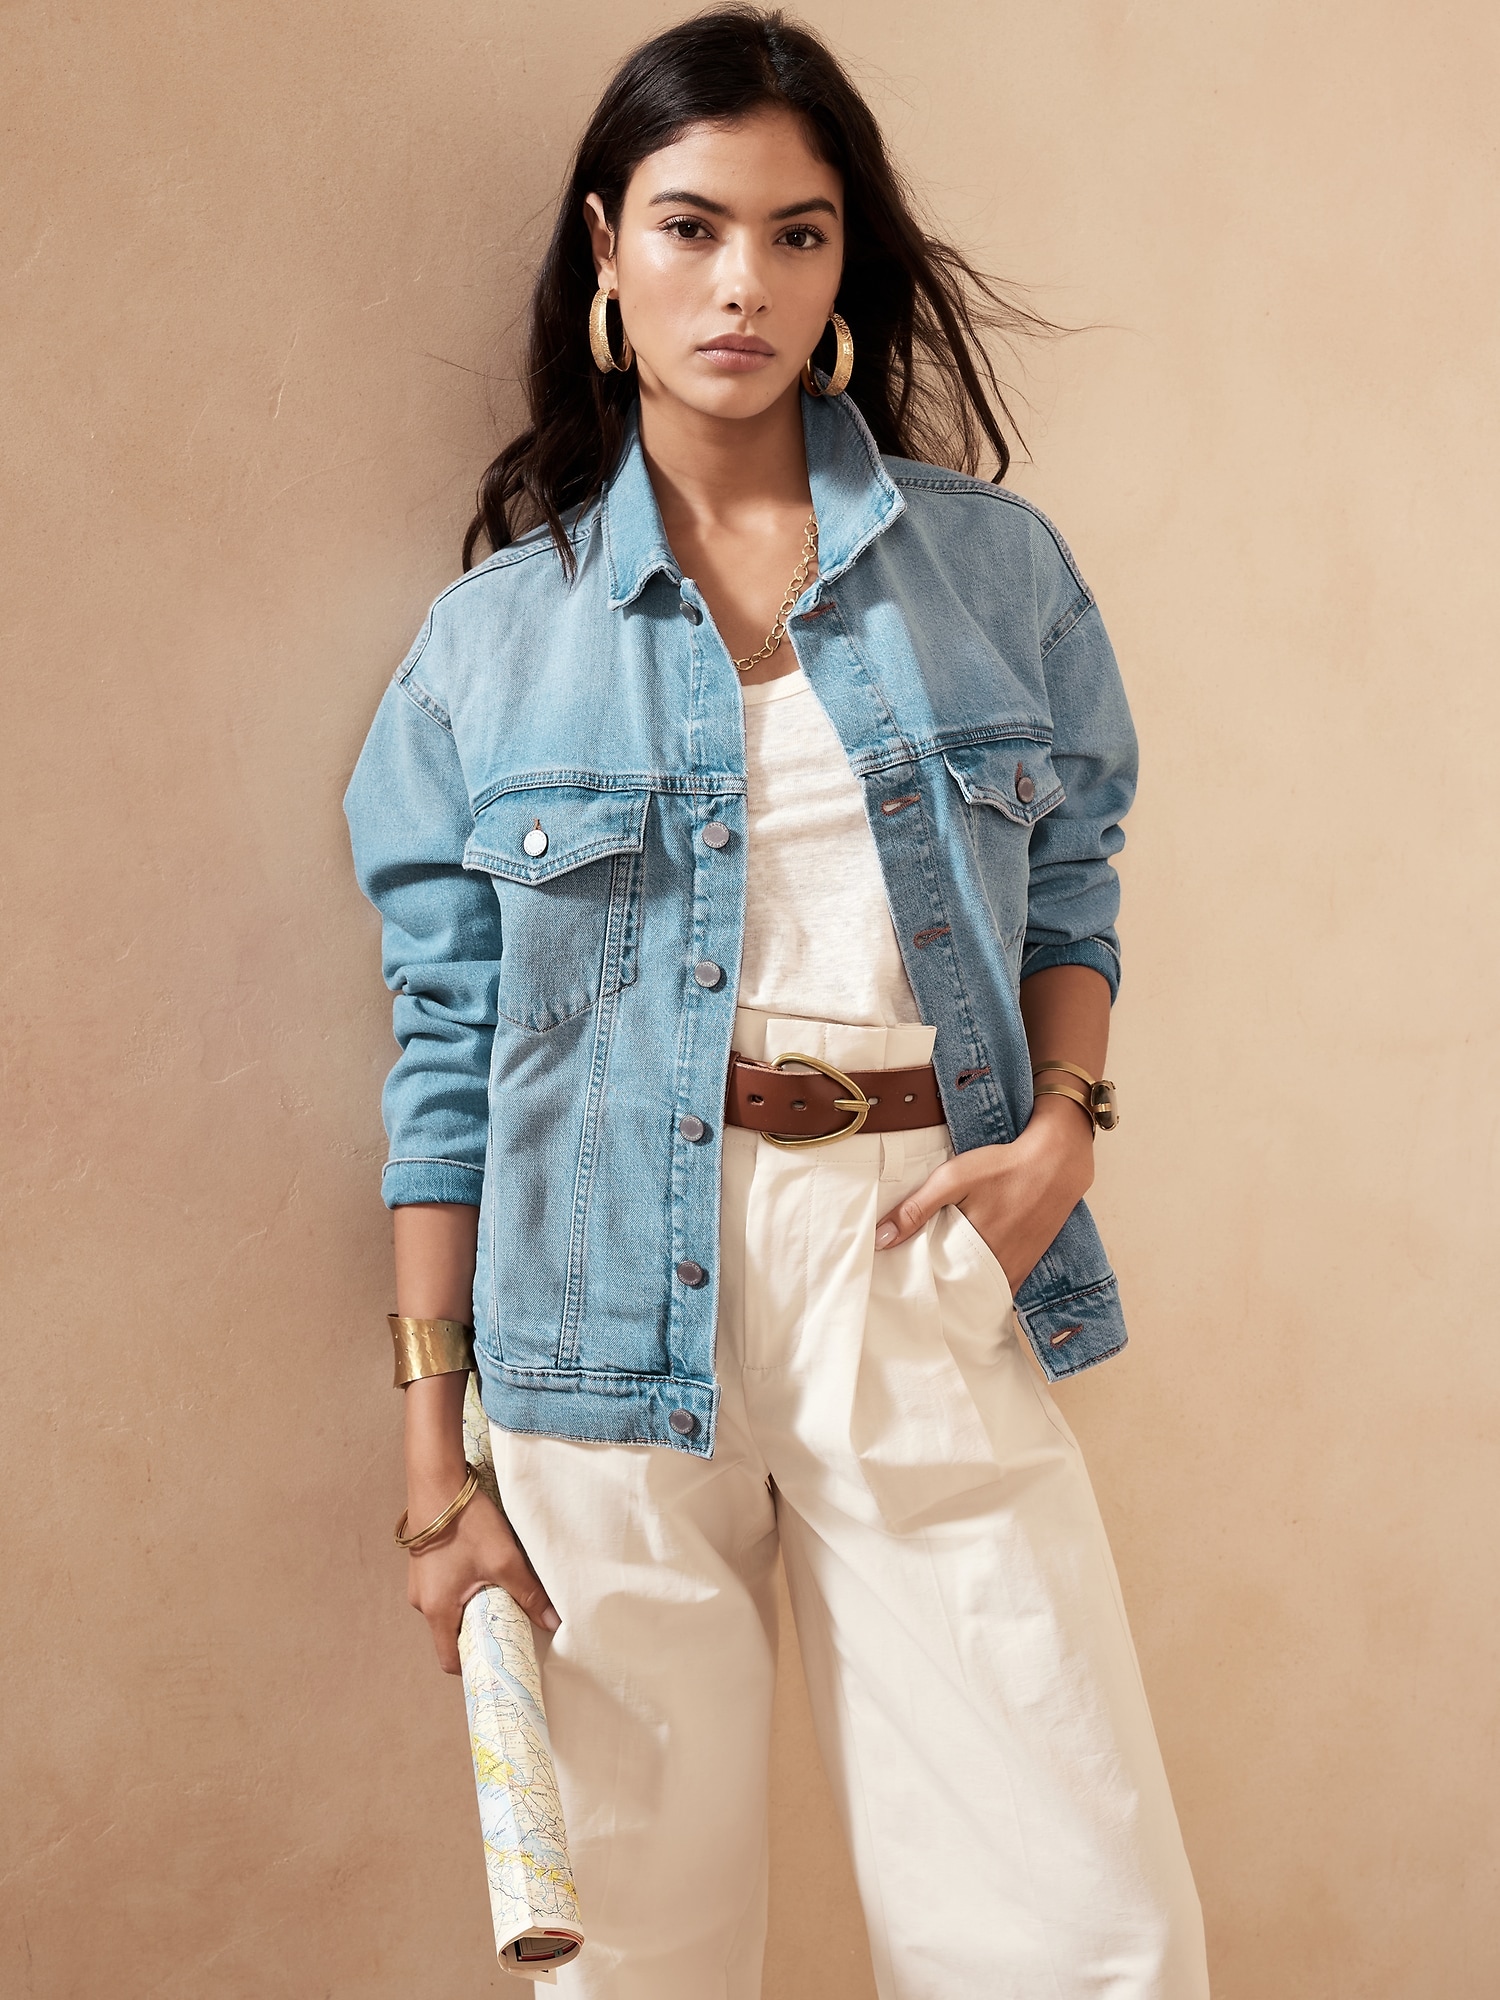 Where can I find an oversized denim jacket like this? I'm looking for a  black and medium wash jacket : r/PetiteFashionAdvice